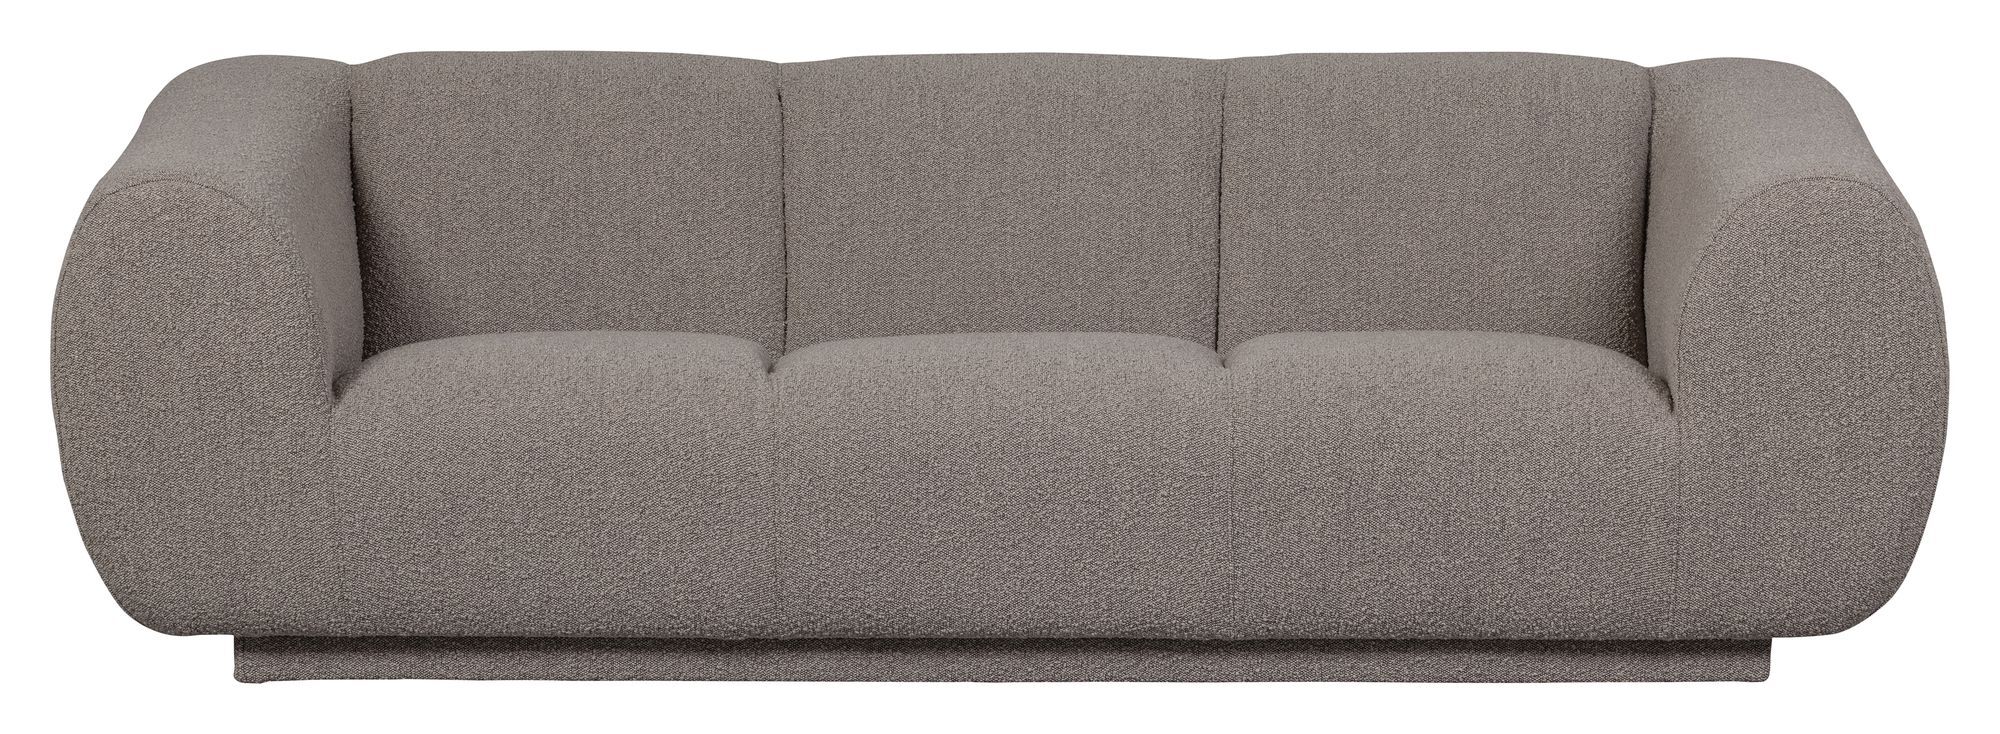 BePureHome Woolly 3-seter Sofa - Natural Mélange Bouclé   Unoliving